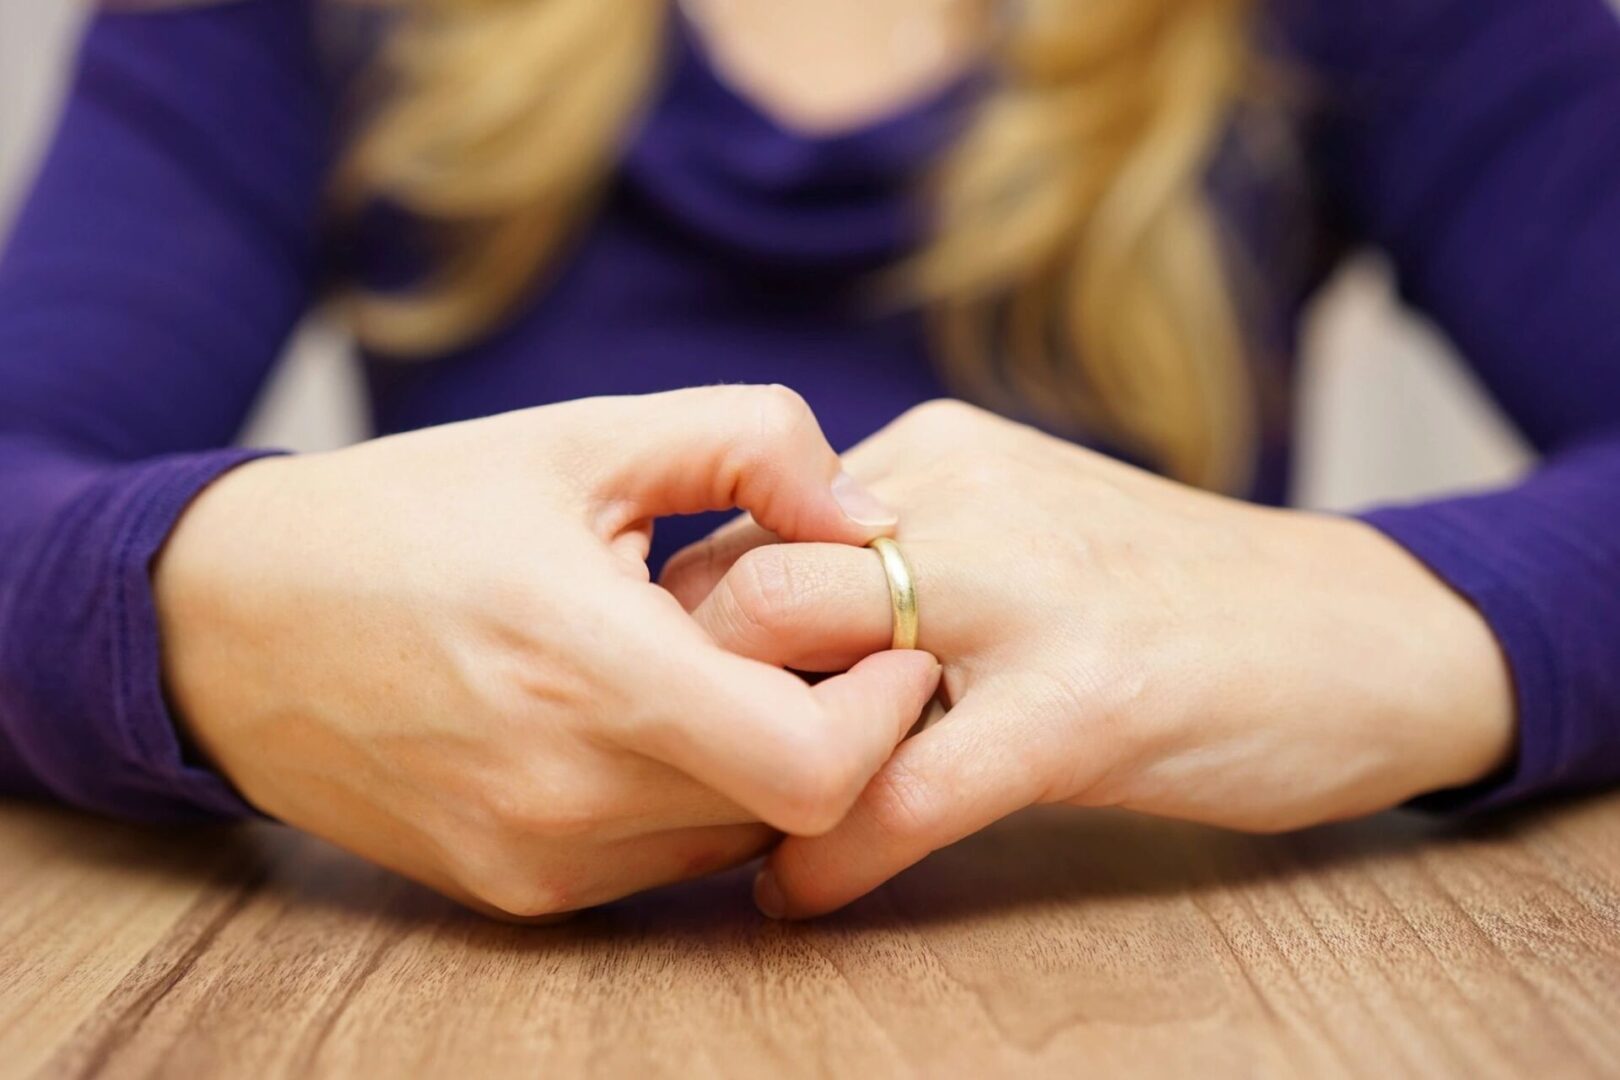 A woman is holding her hands together with a wedding ring.